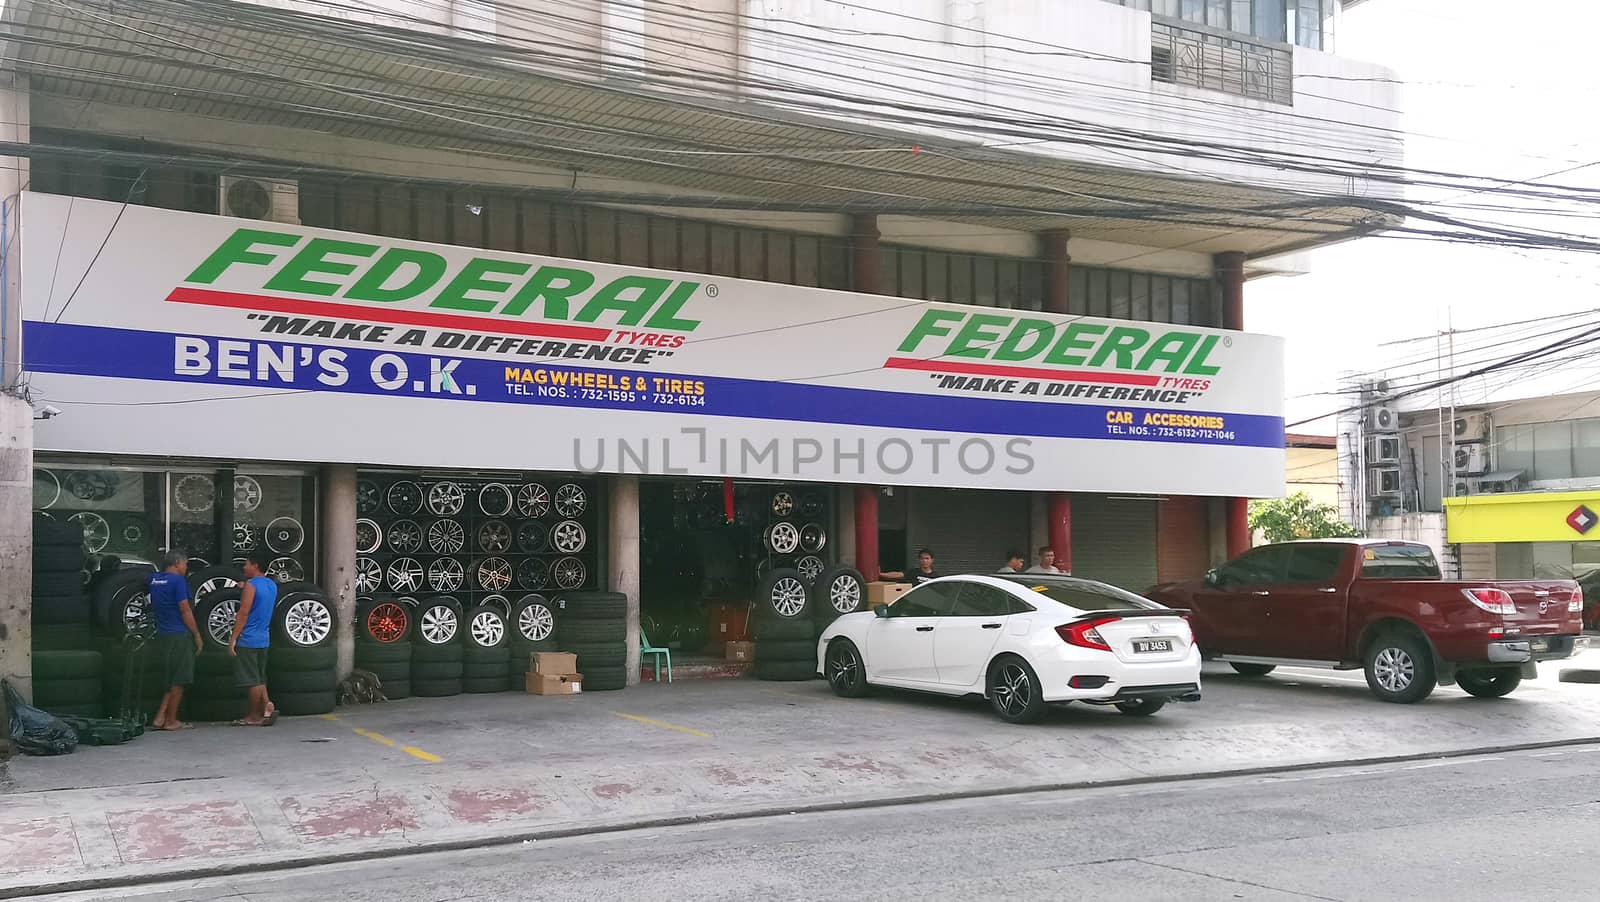 Federal tires shop facade in Quezon City, Philippines by imwaltersy